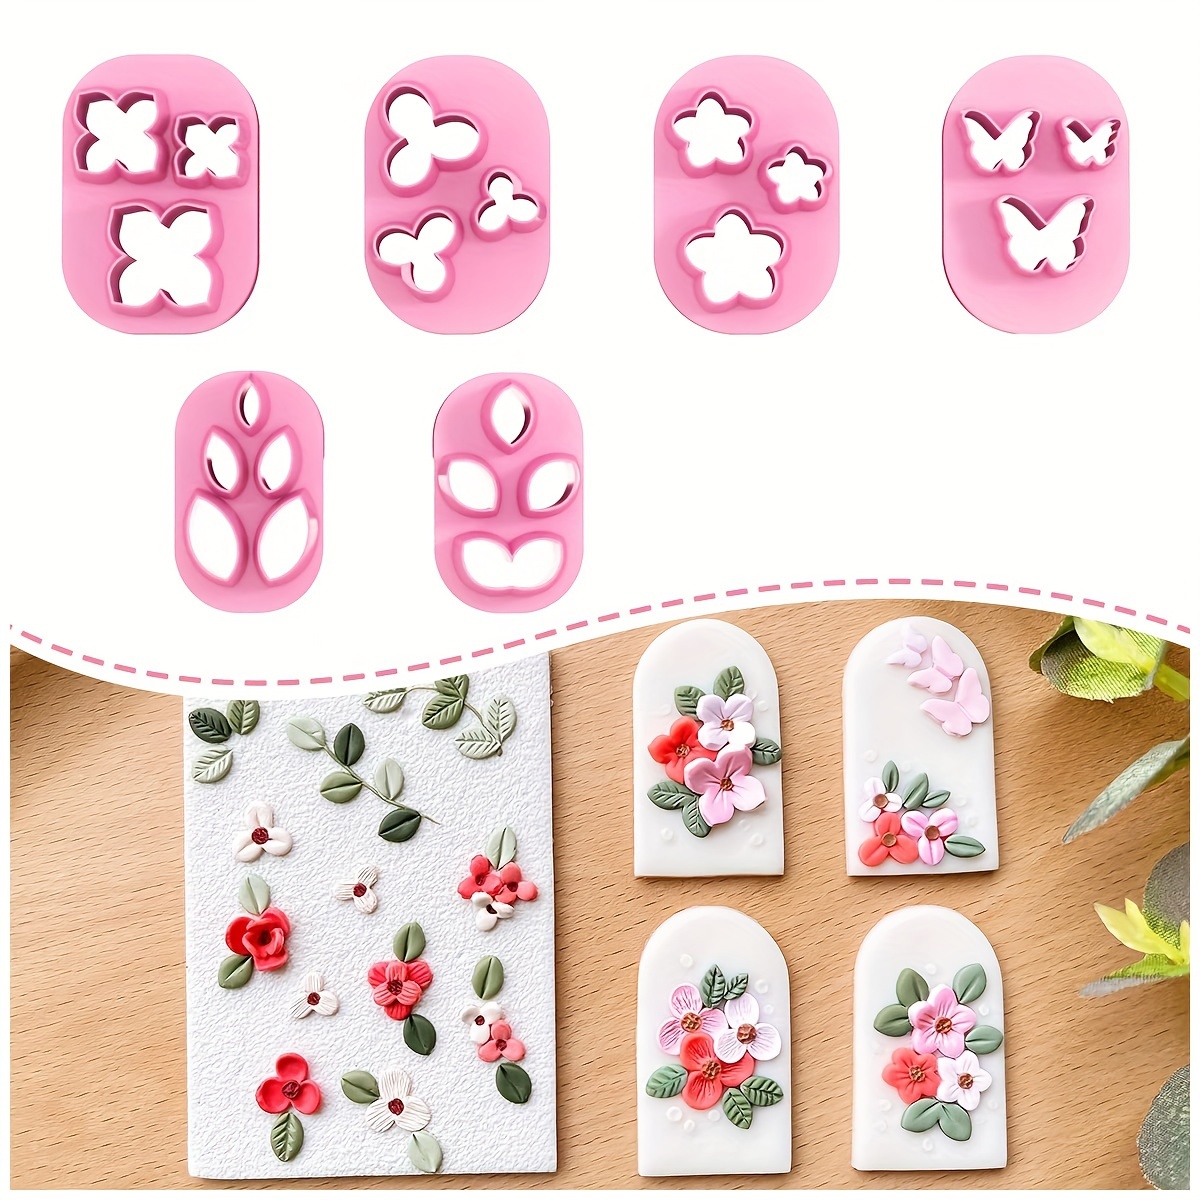 

10pcs Mini Polymer Clay Cutter Set - Floral, Leaf & Butterfly Shapes For Diy Earrings And Jewelry Crafting Pendants For Jewelry Making Spacer Beads For Jewelry Making